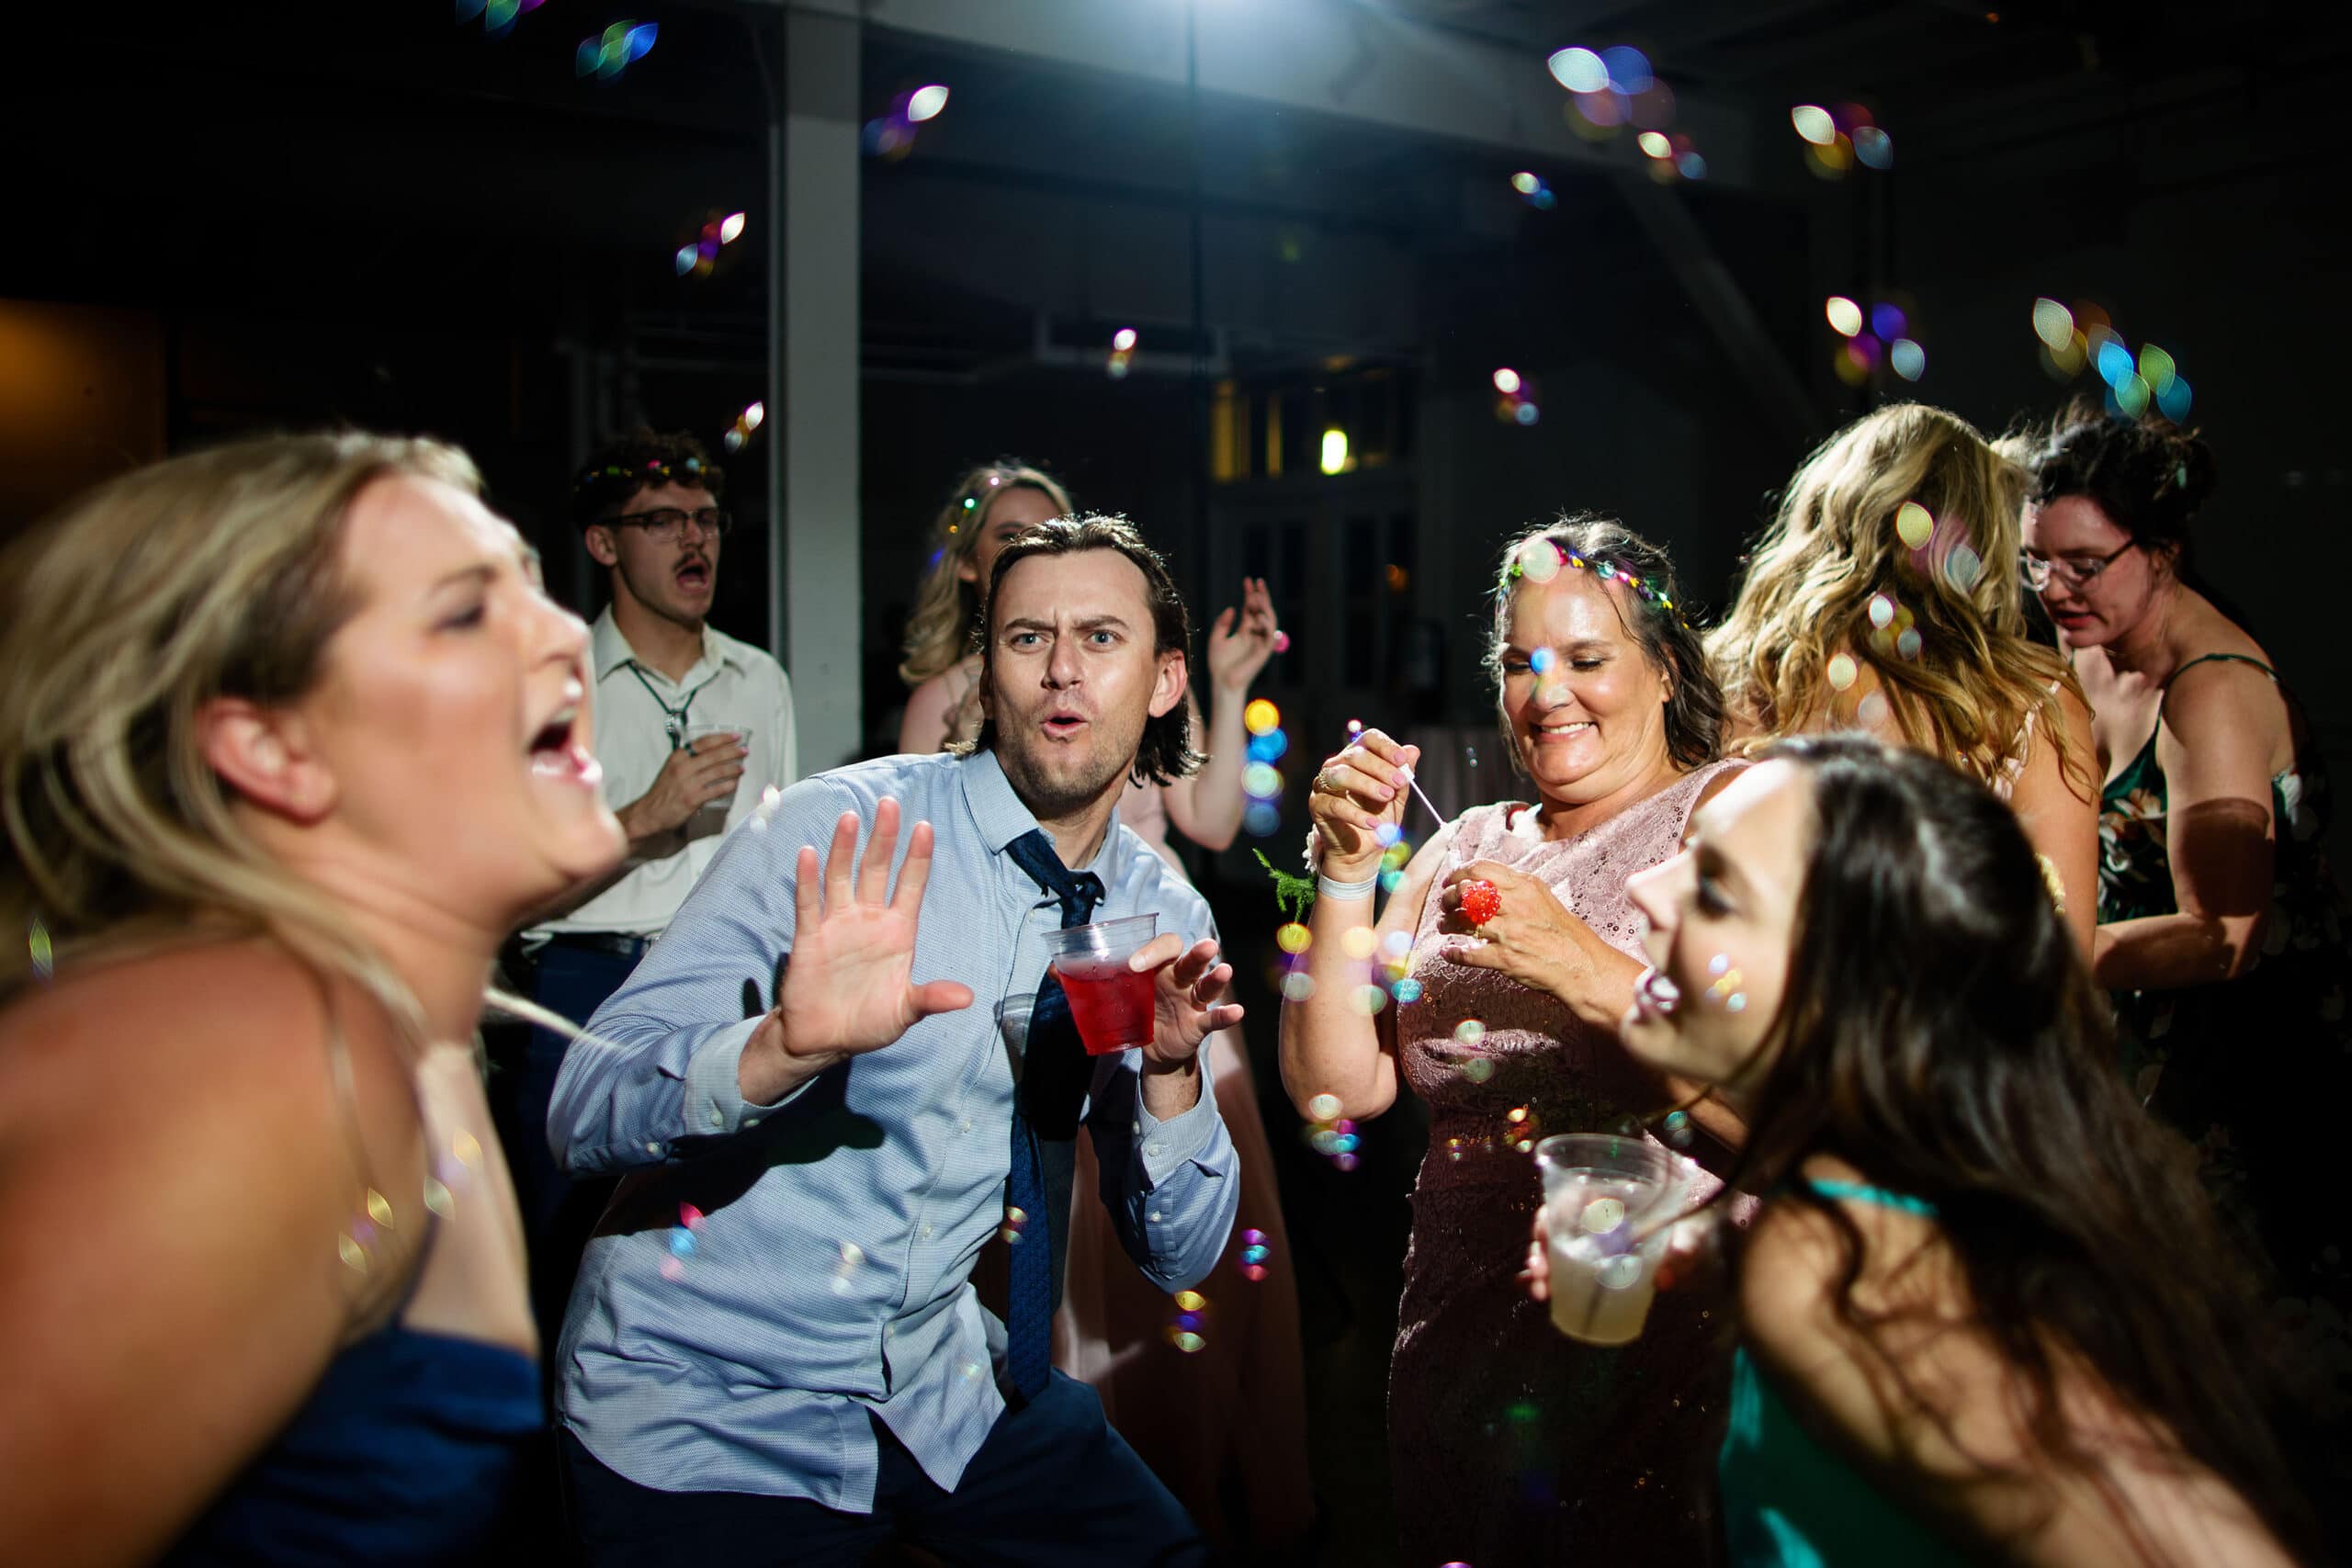 Guests dancand blow bubbles during a wedding reception at Blanc in Denver